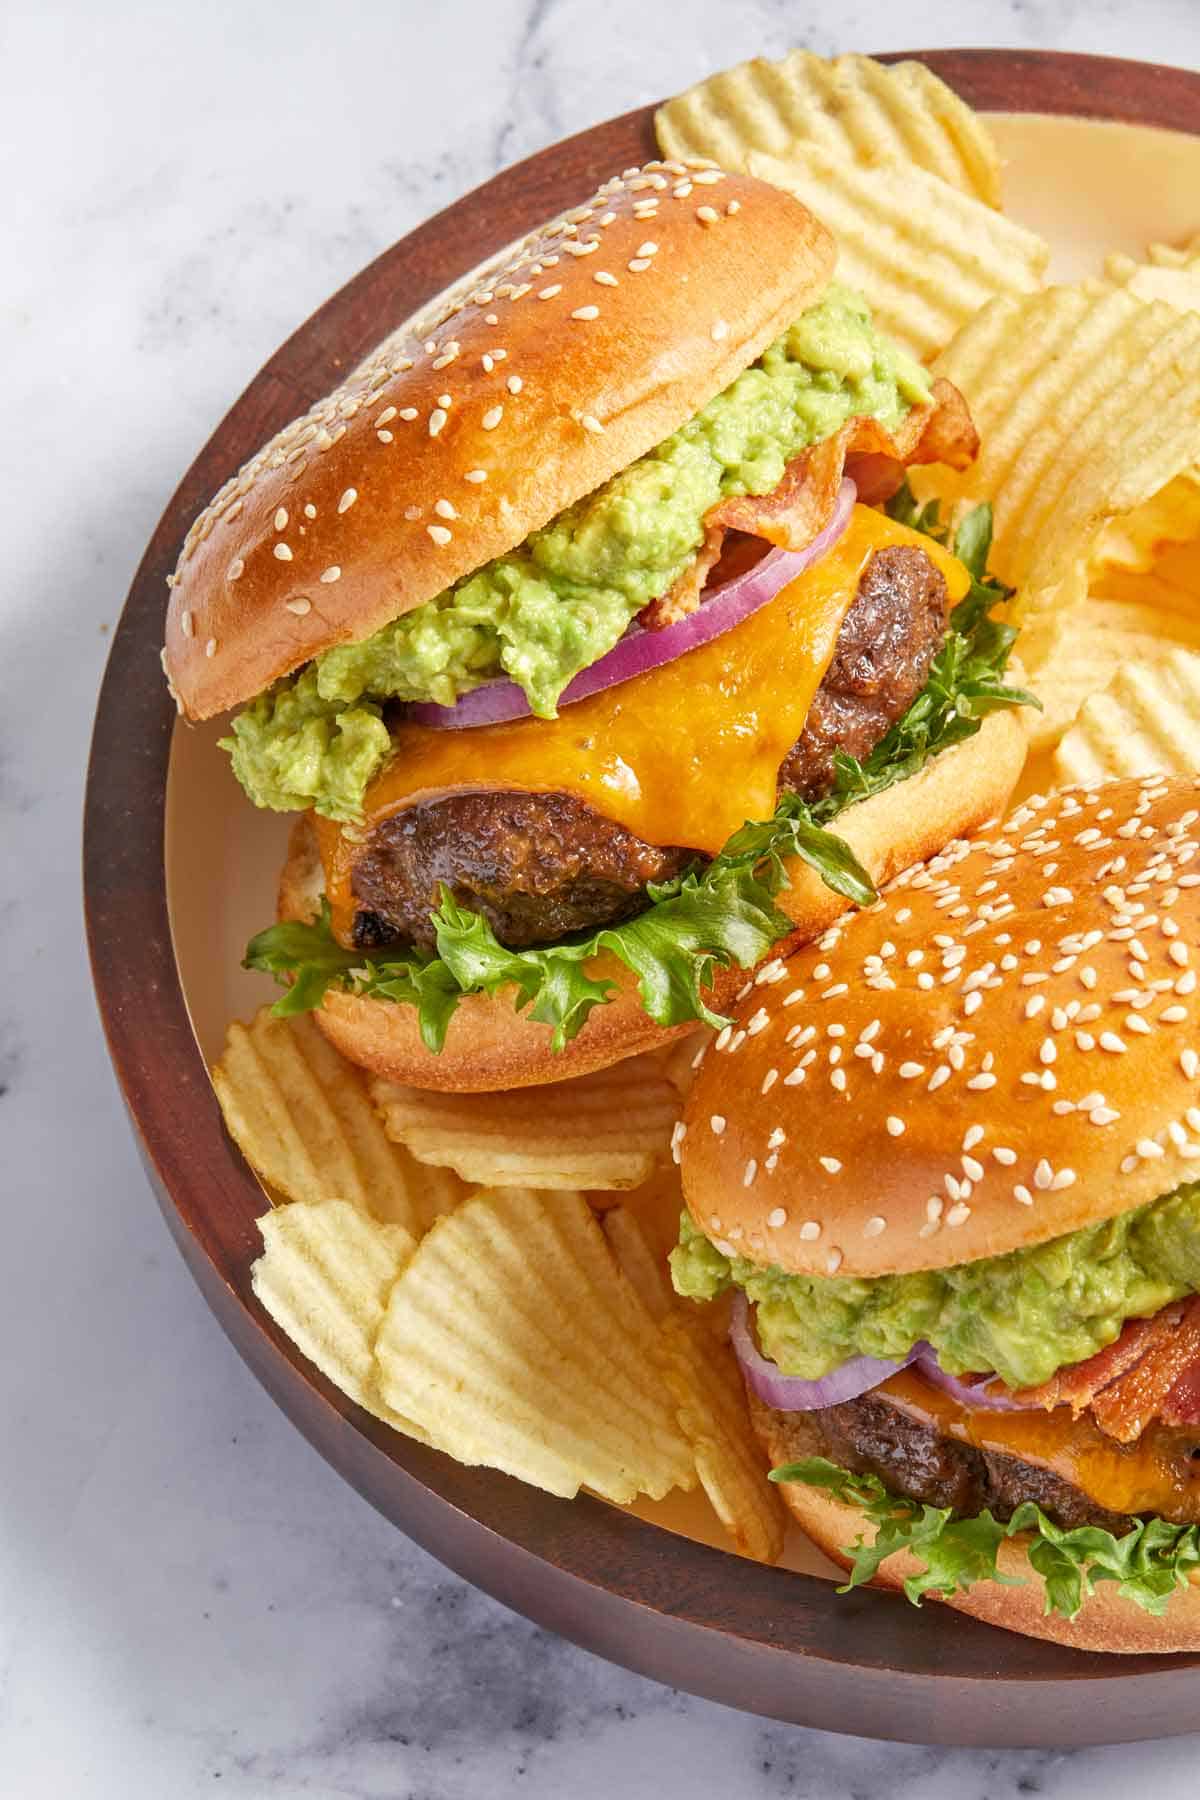 A plate with two avocado burgers over ruffled chips.